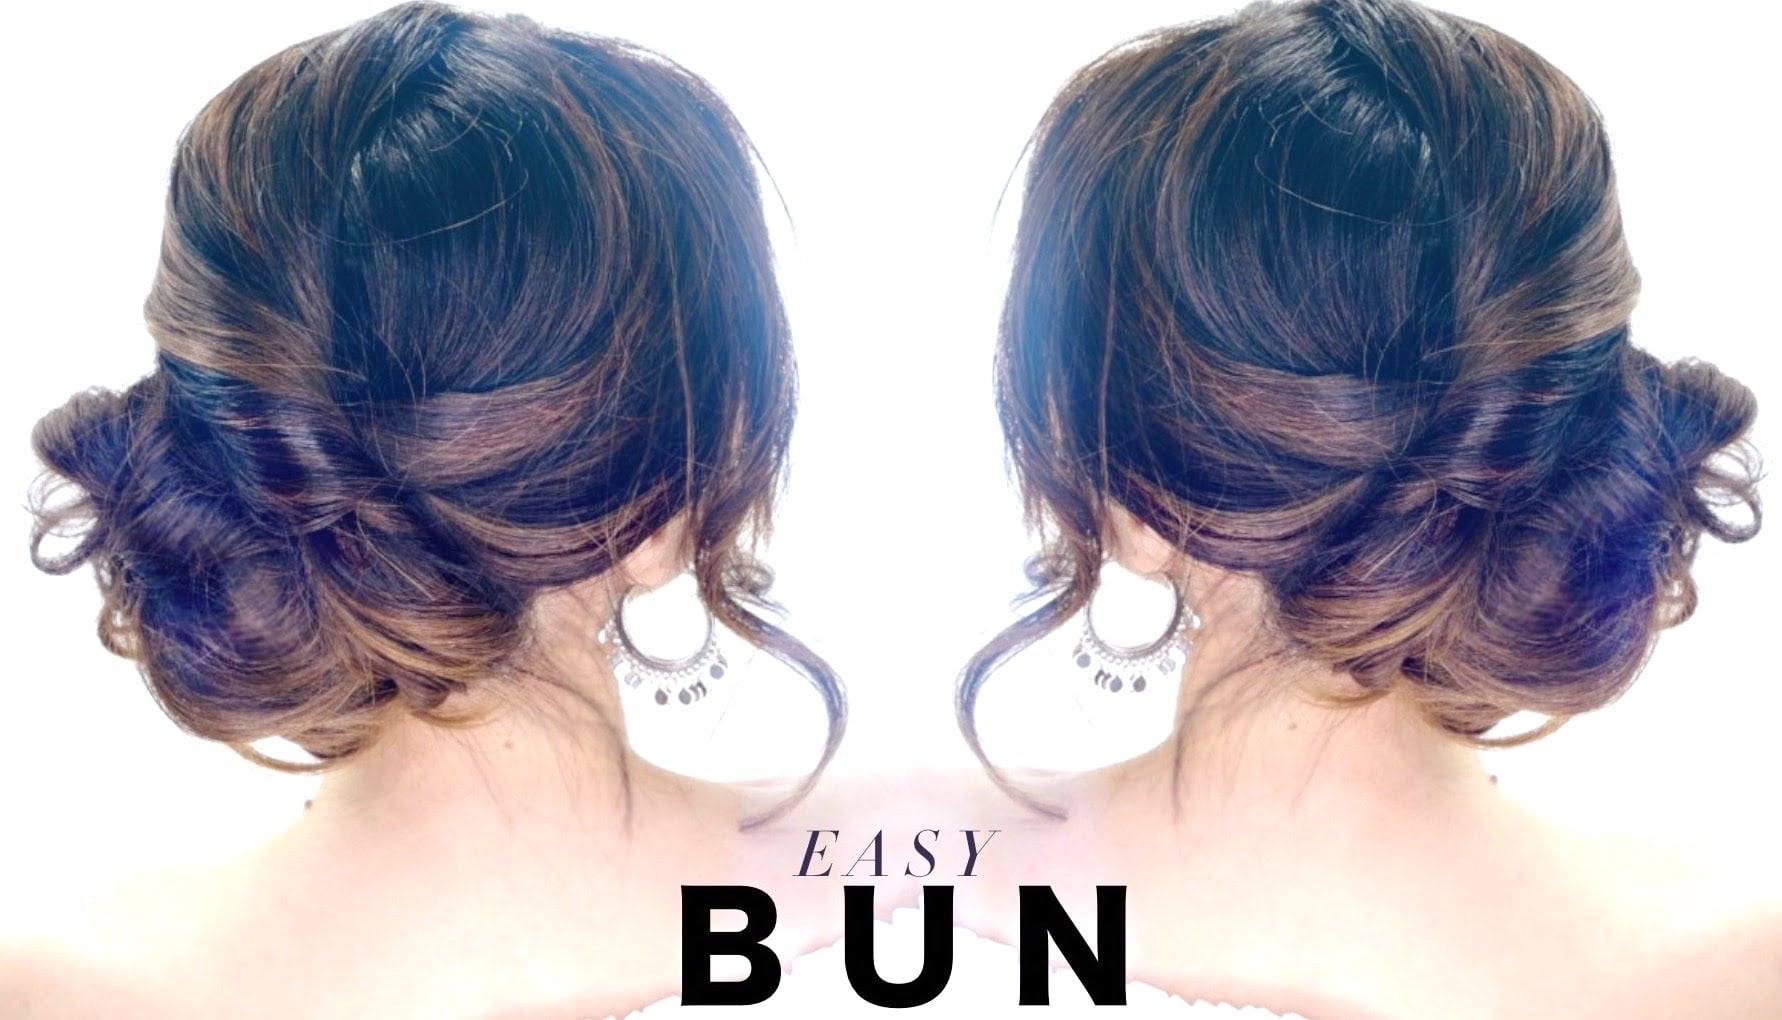 Side bun  Sonam Kapoor  Image Source  Pinterest  Curated by Witty Vows   Witty Vows